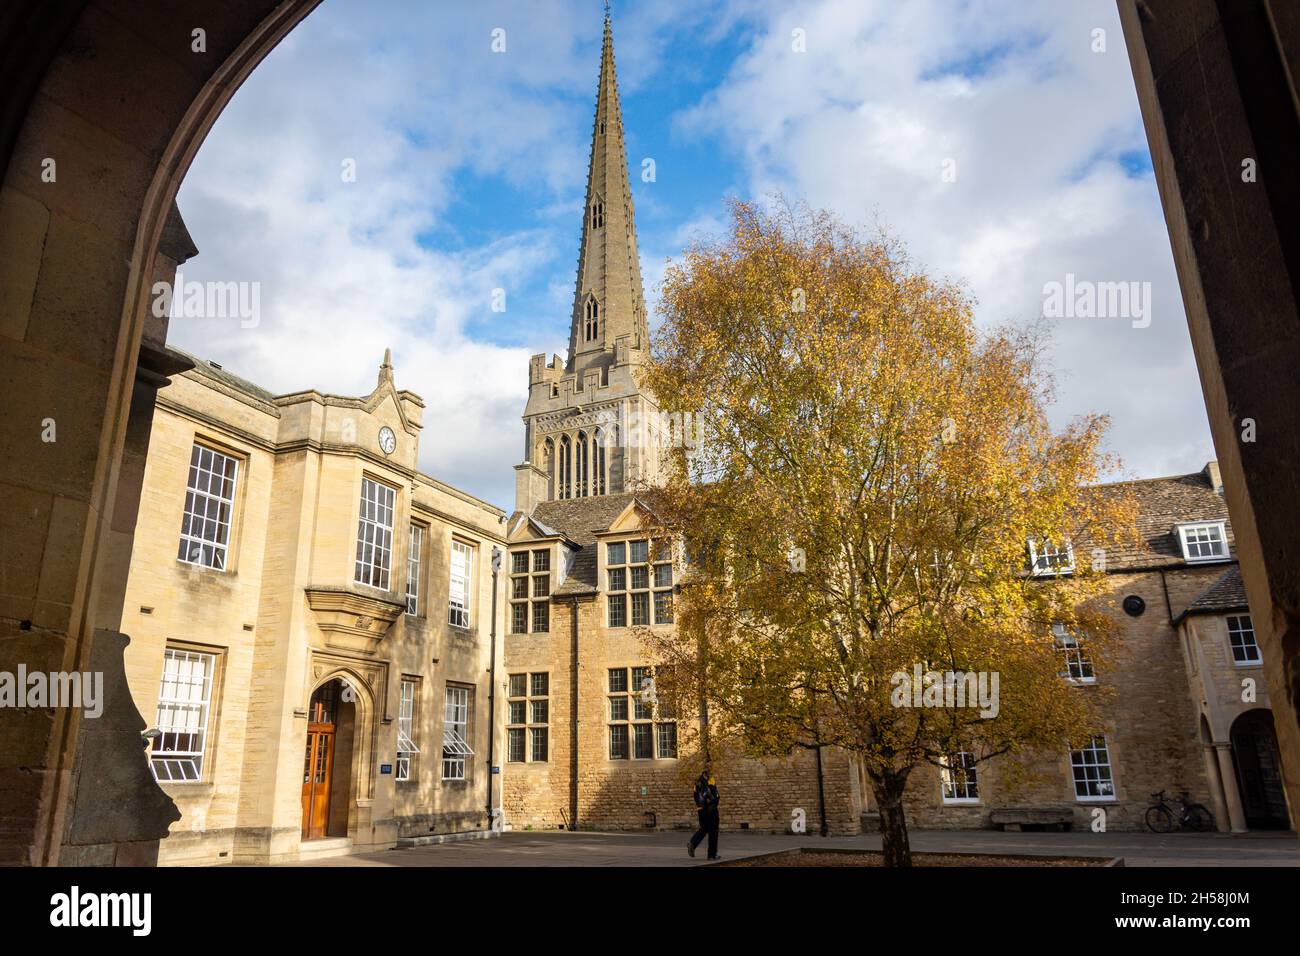 St Peter's Church di Oudle School Cloisters, Oundle, Northamptonshire, Inghilterra, Regno Unito Foto Stock